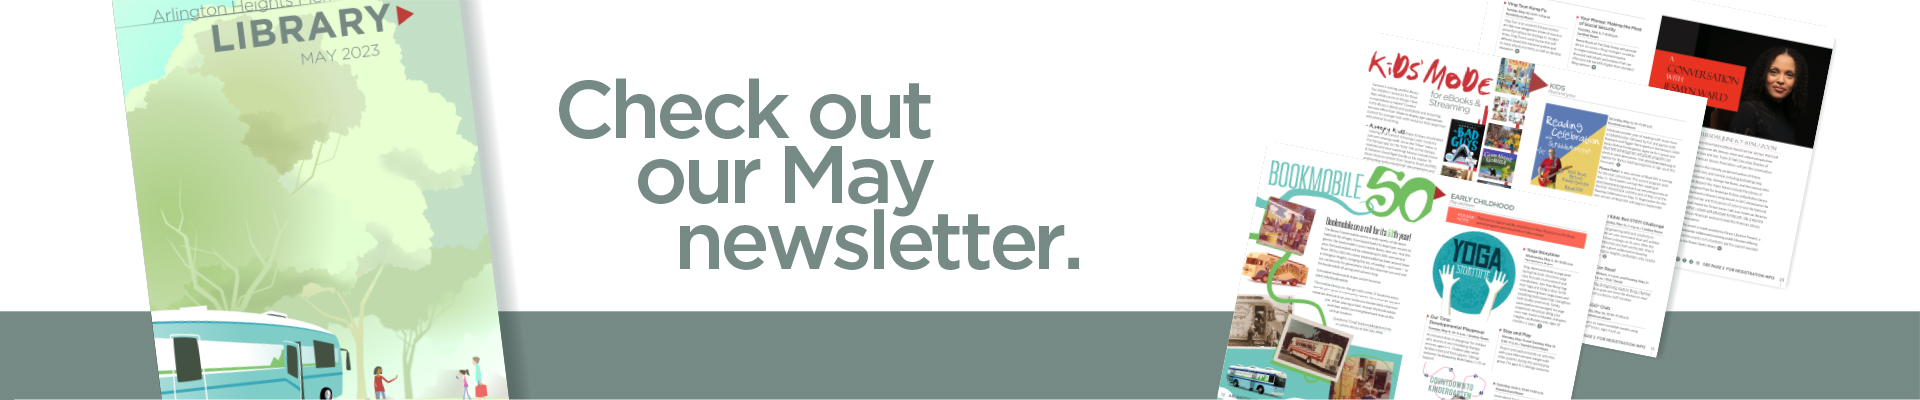 Check out our May newsletter